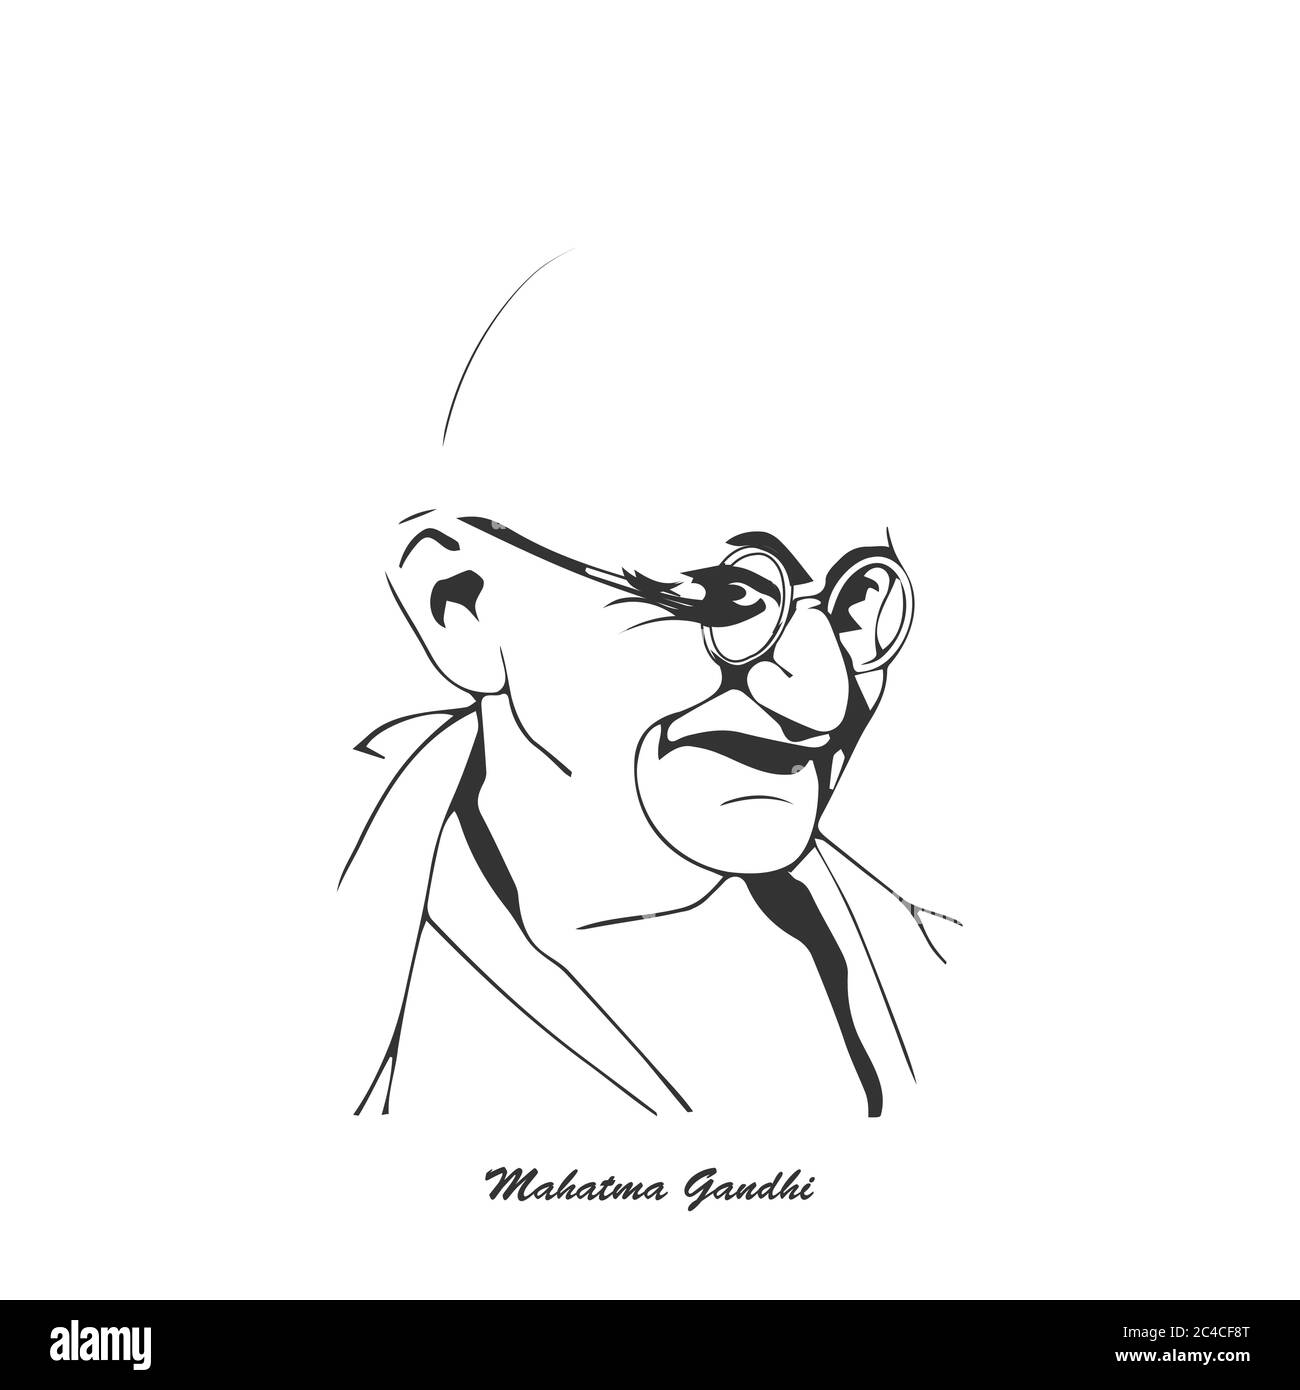 Vector illustration of Mohandas Karamchand Gandhi or mahatma gandhi, a great Indian freedom fighter who promoted non voilence. Stock Vector